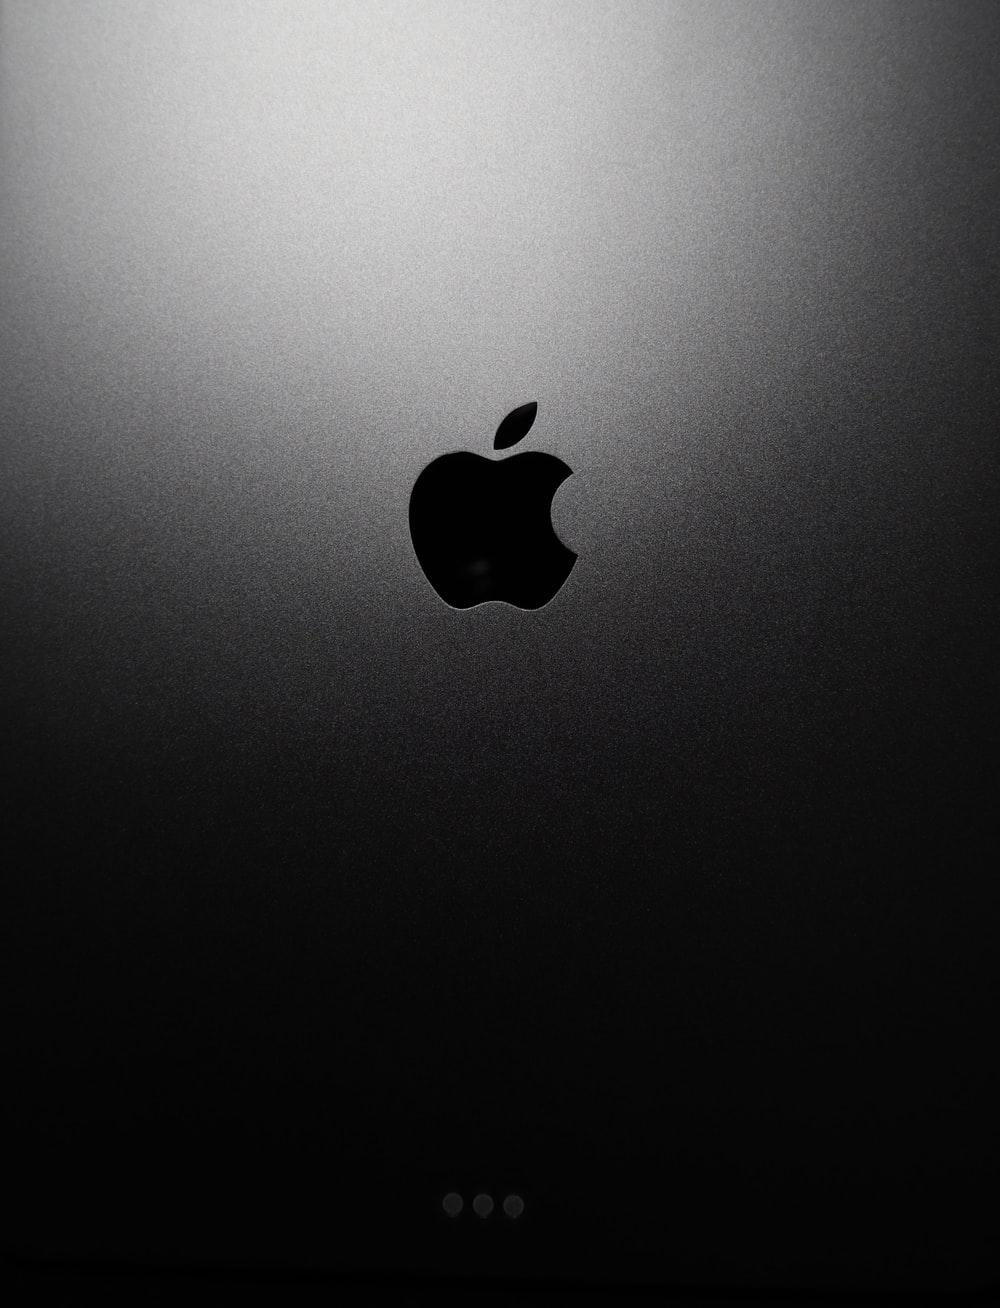 Black and Gold Apple Wallpapers - Top Free Black and Gold Apple ...